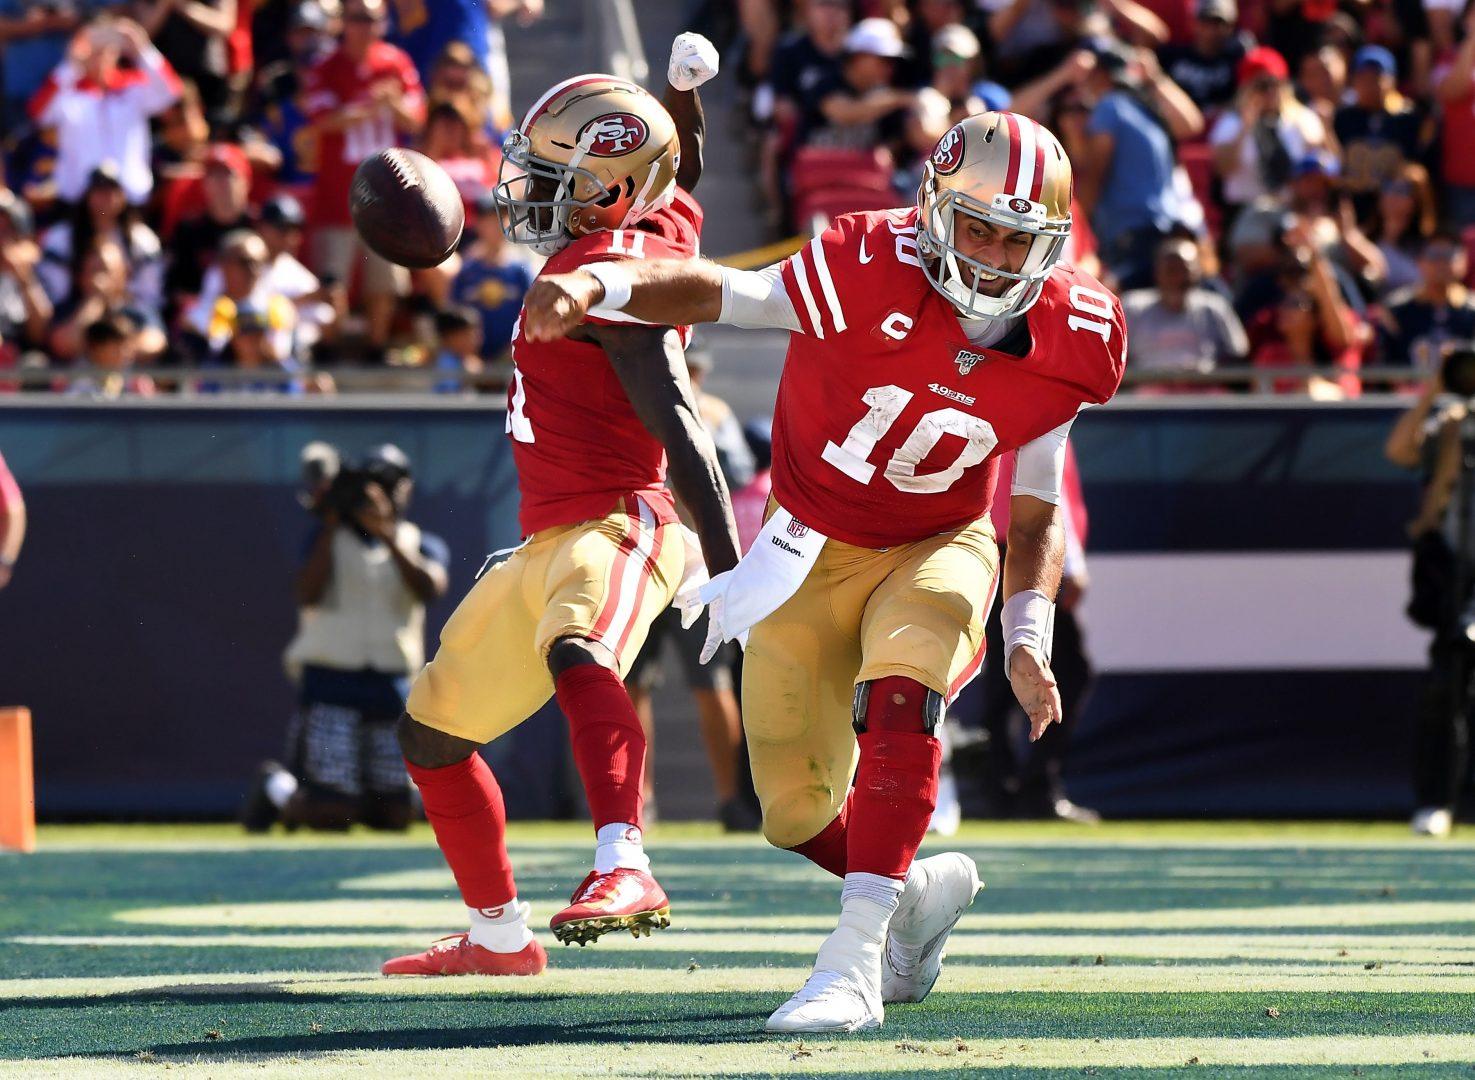 San Francisco 49ers quarterback Jimmy Garoppolo (10) spikes the ball after scoring a touchdown against the Rams in the 3rd quarter at the Coliseum on Oct. 13, 2019. (Wally Skalij/Los Angeles Times/TNS)